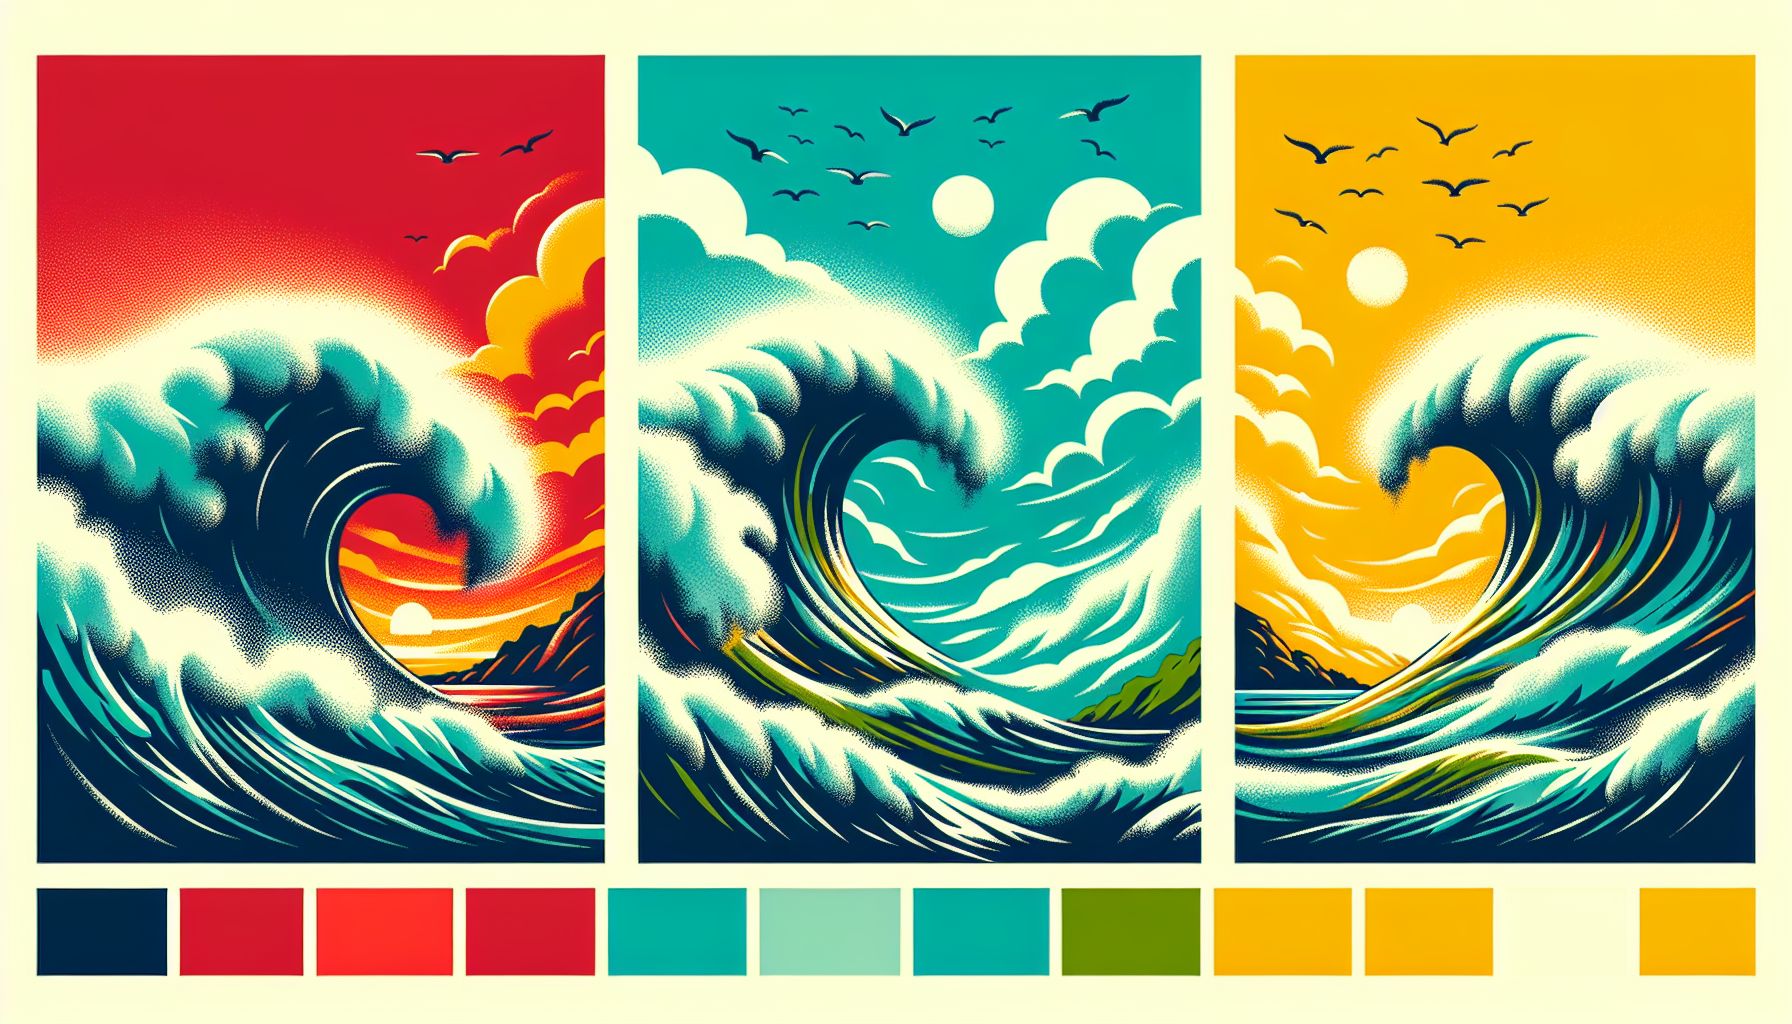 Tsunami in flat illustration style and white background, red #f47574, green #88c7a8, yellow #fcc44b, and blue #645bc8 colors.